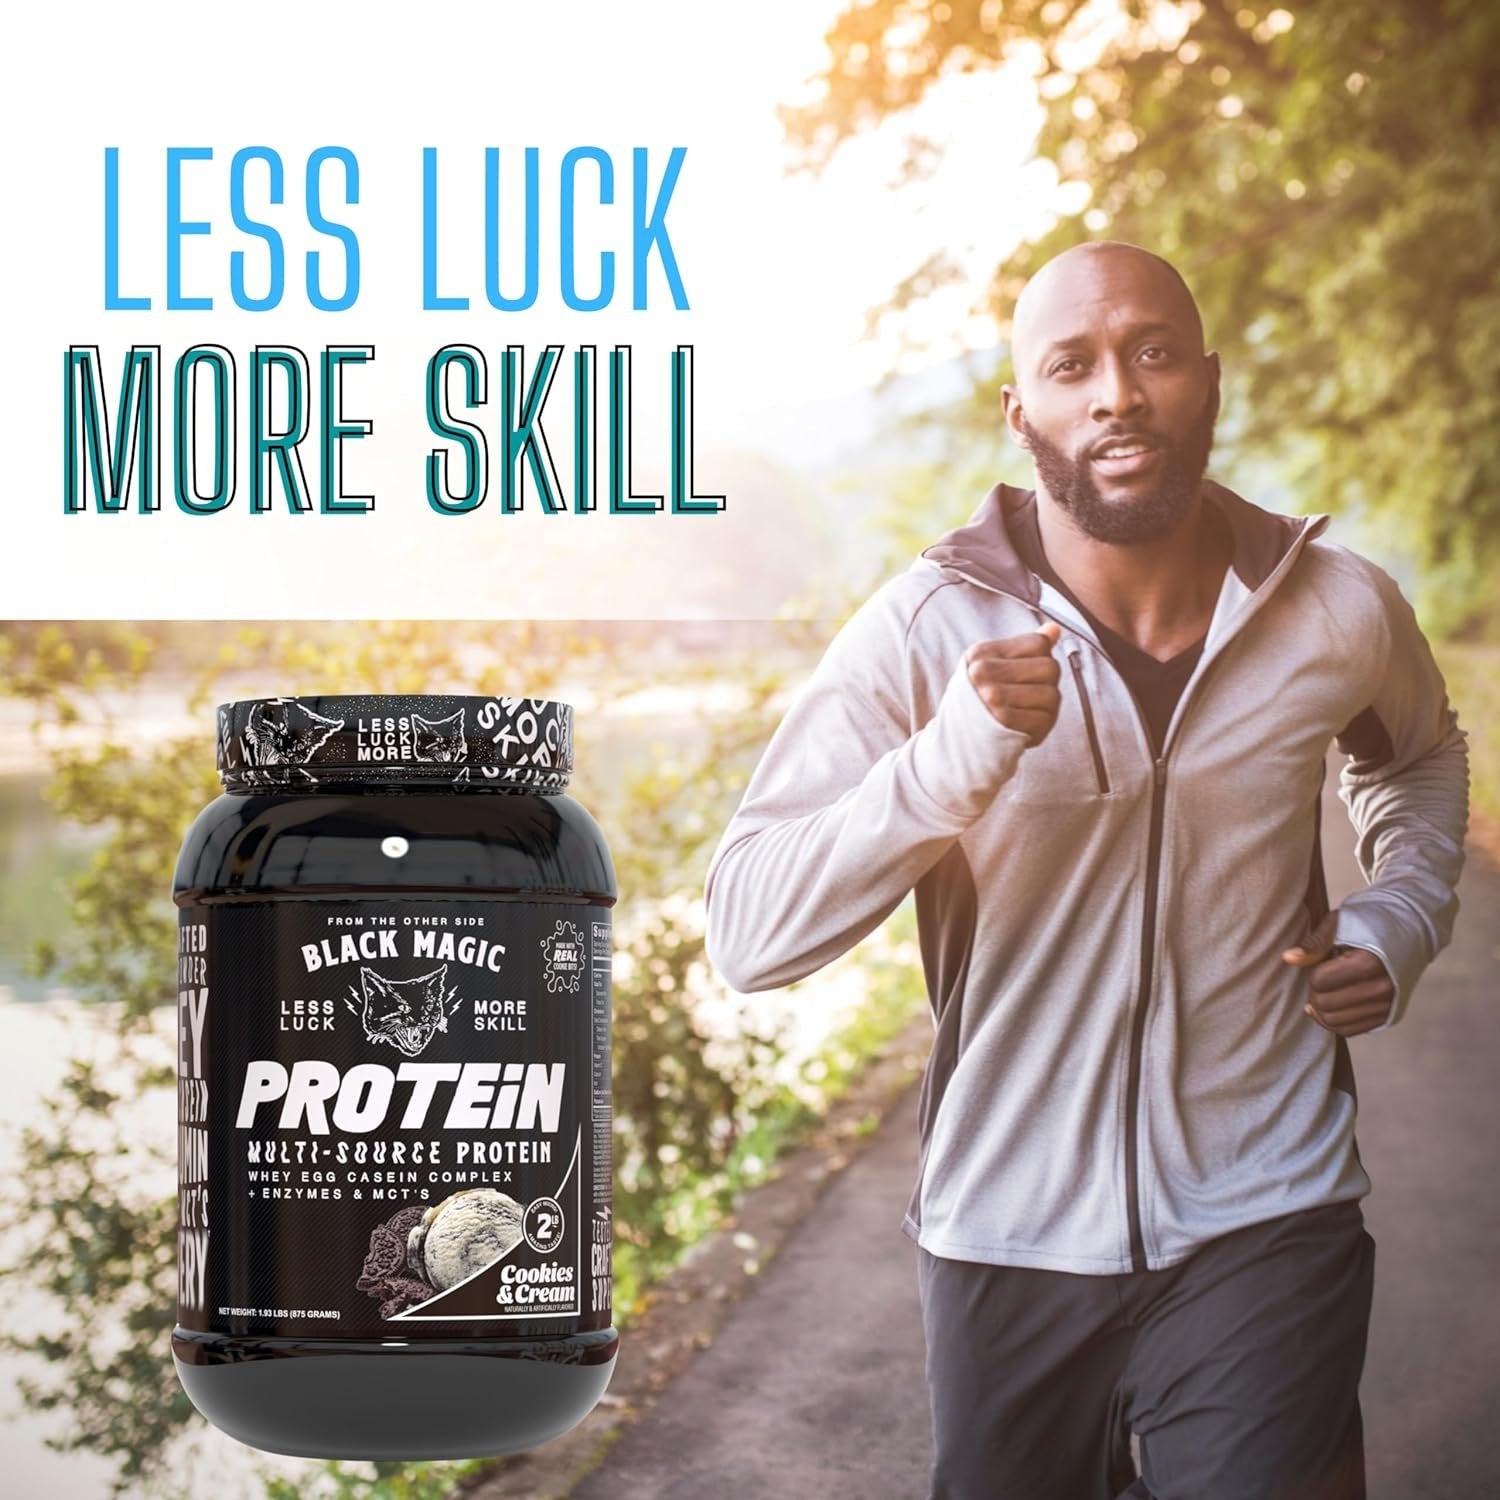 Black Magic Multi-Source Protein - Whey, Egg, and Casein Complex with Enzymes & MCT Powder - Pre Workout and Post Workout - Honey Grahms Protein Powder - 24g Protein - 2 LB with Bonus Key Chain